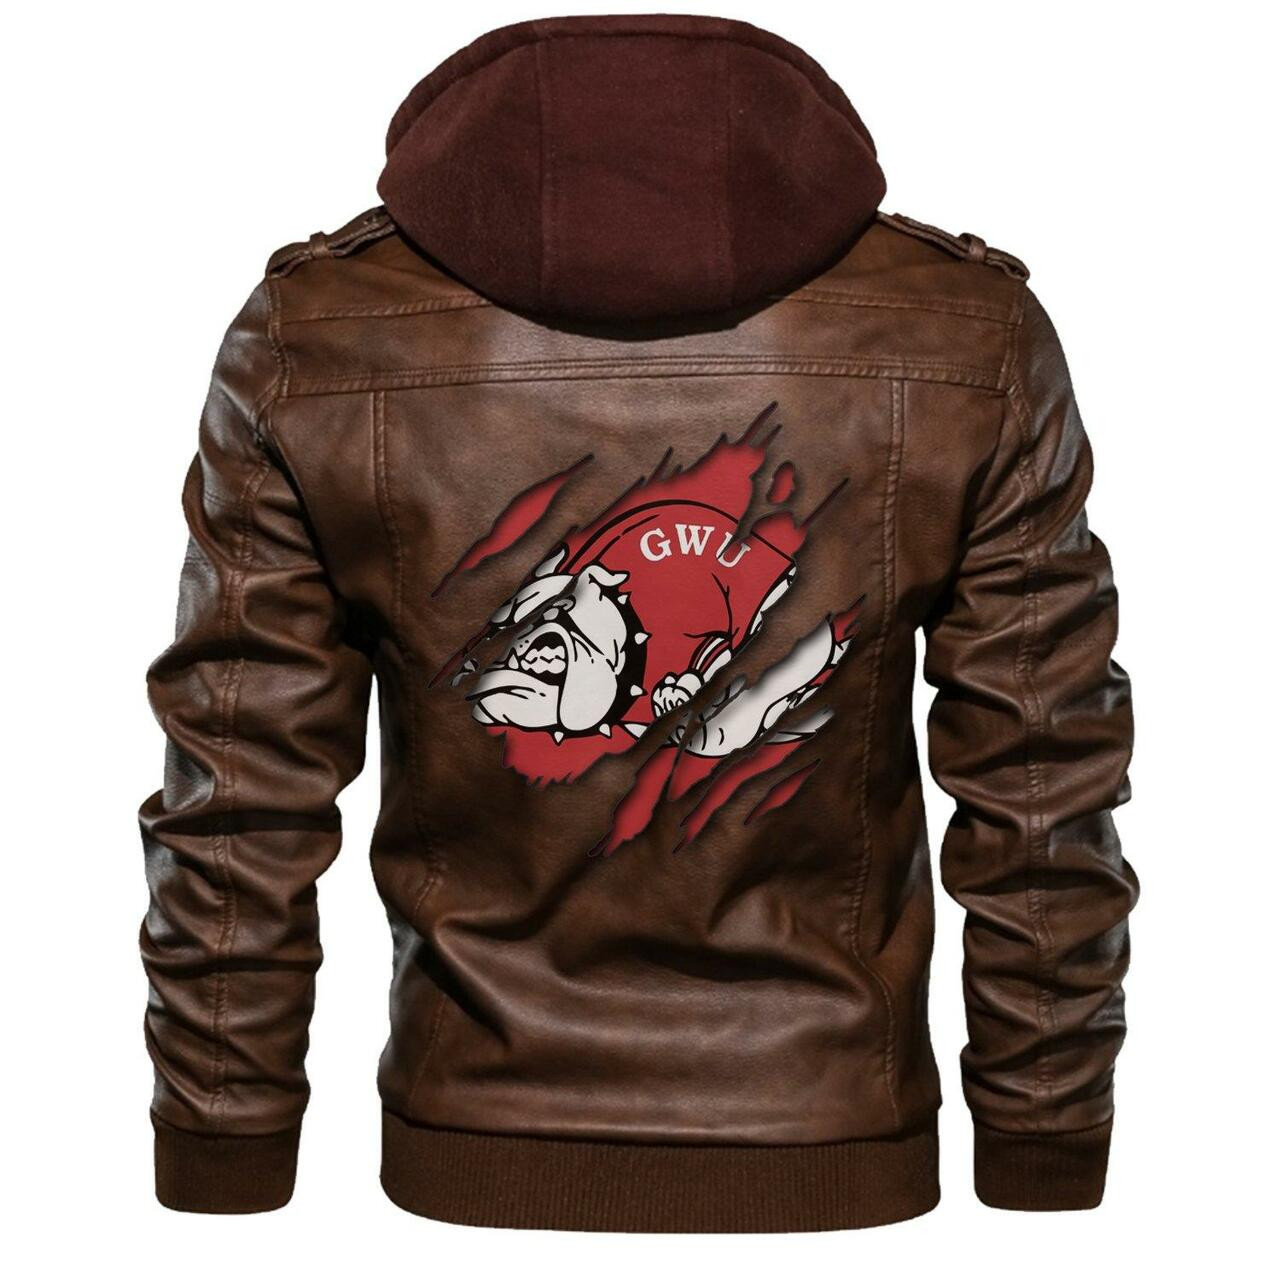 Nice leather jacket For you 243